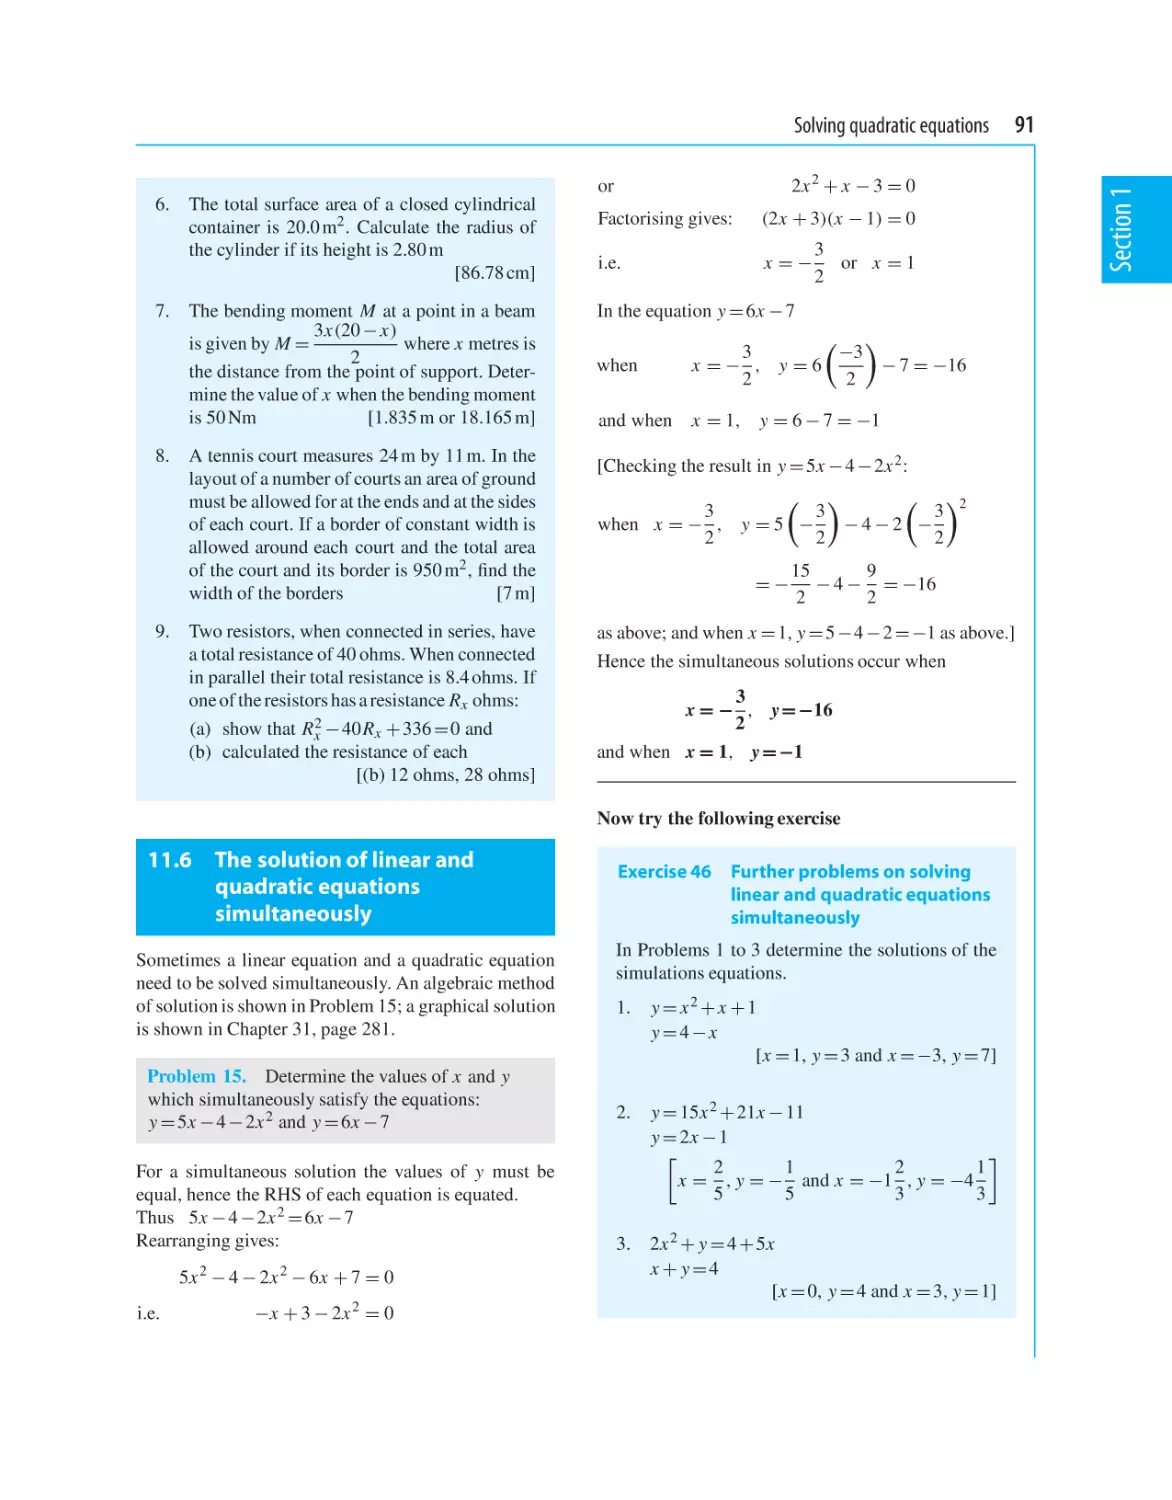 11.6 The solution of linear and quadratic equations simultaneously